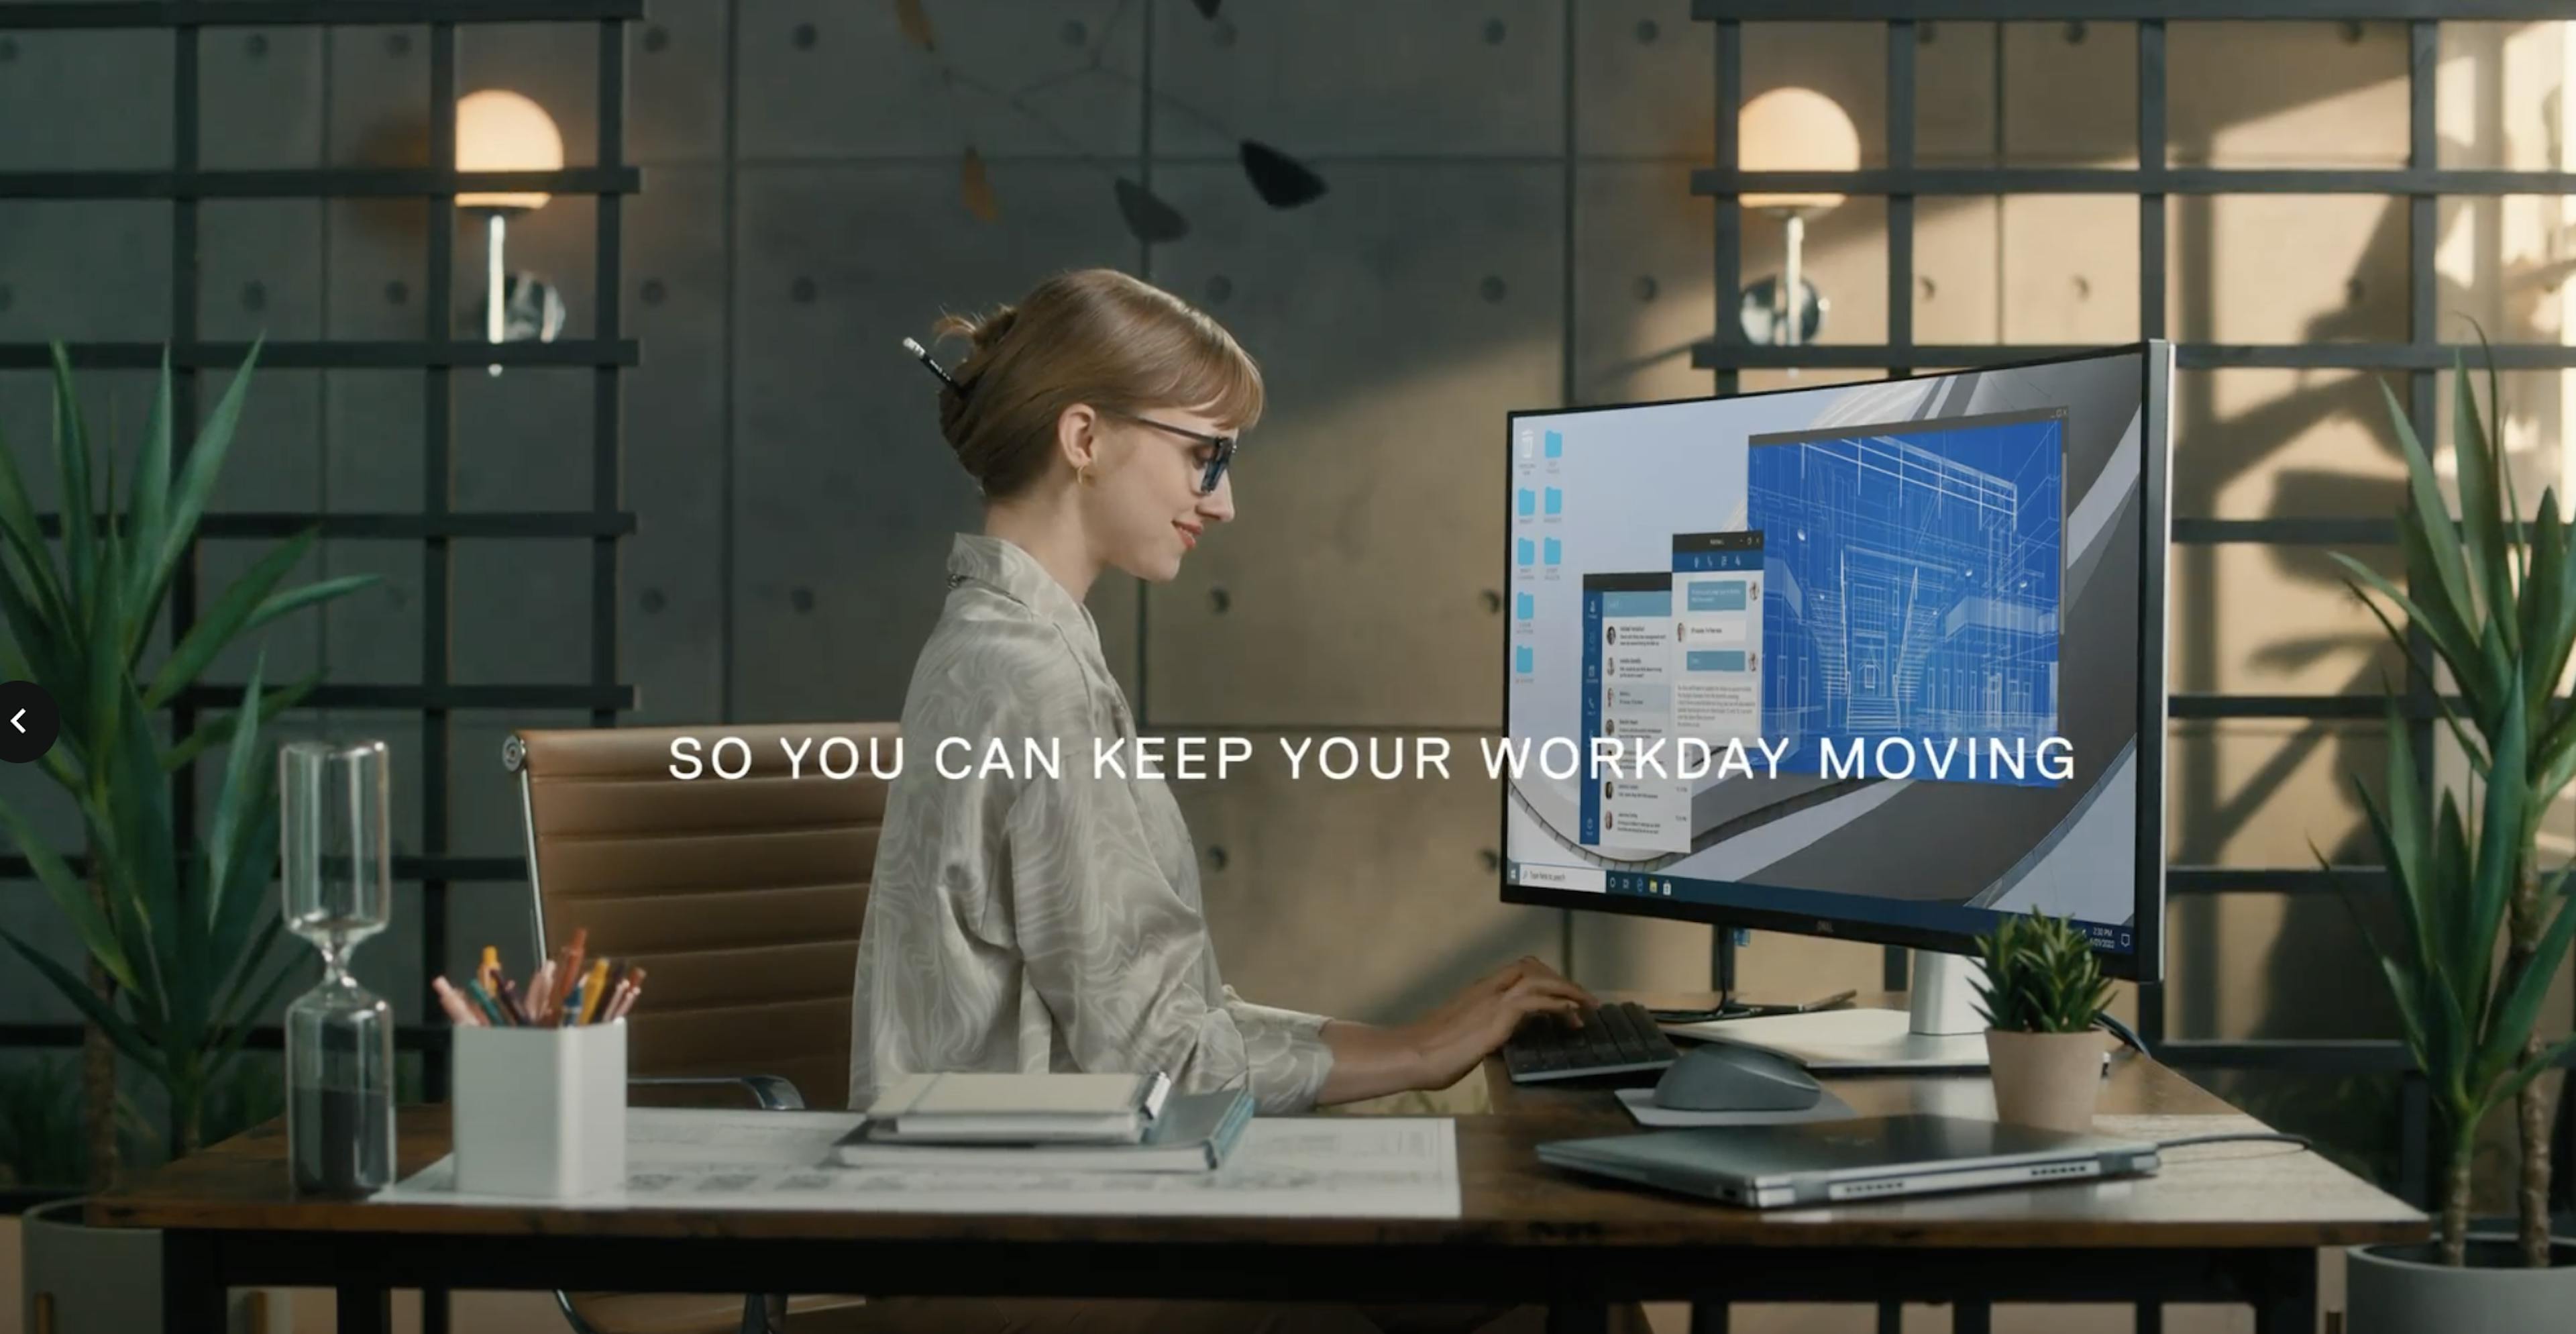 A woman sits in front of her large computer monitor with the text "So you can keep your workday moving"